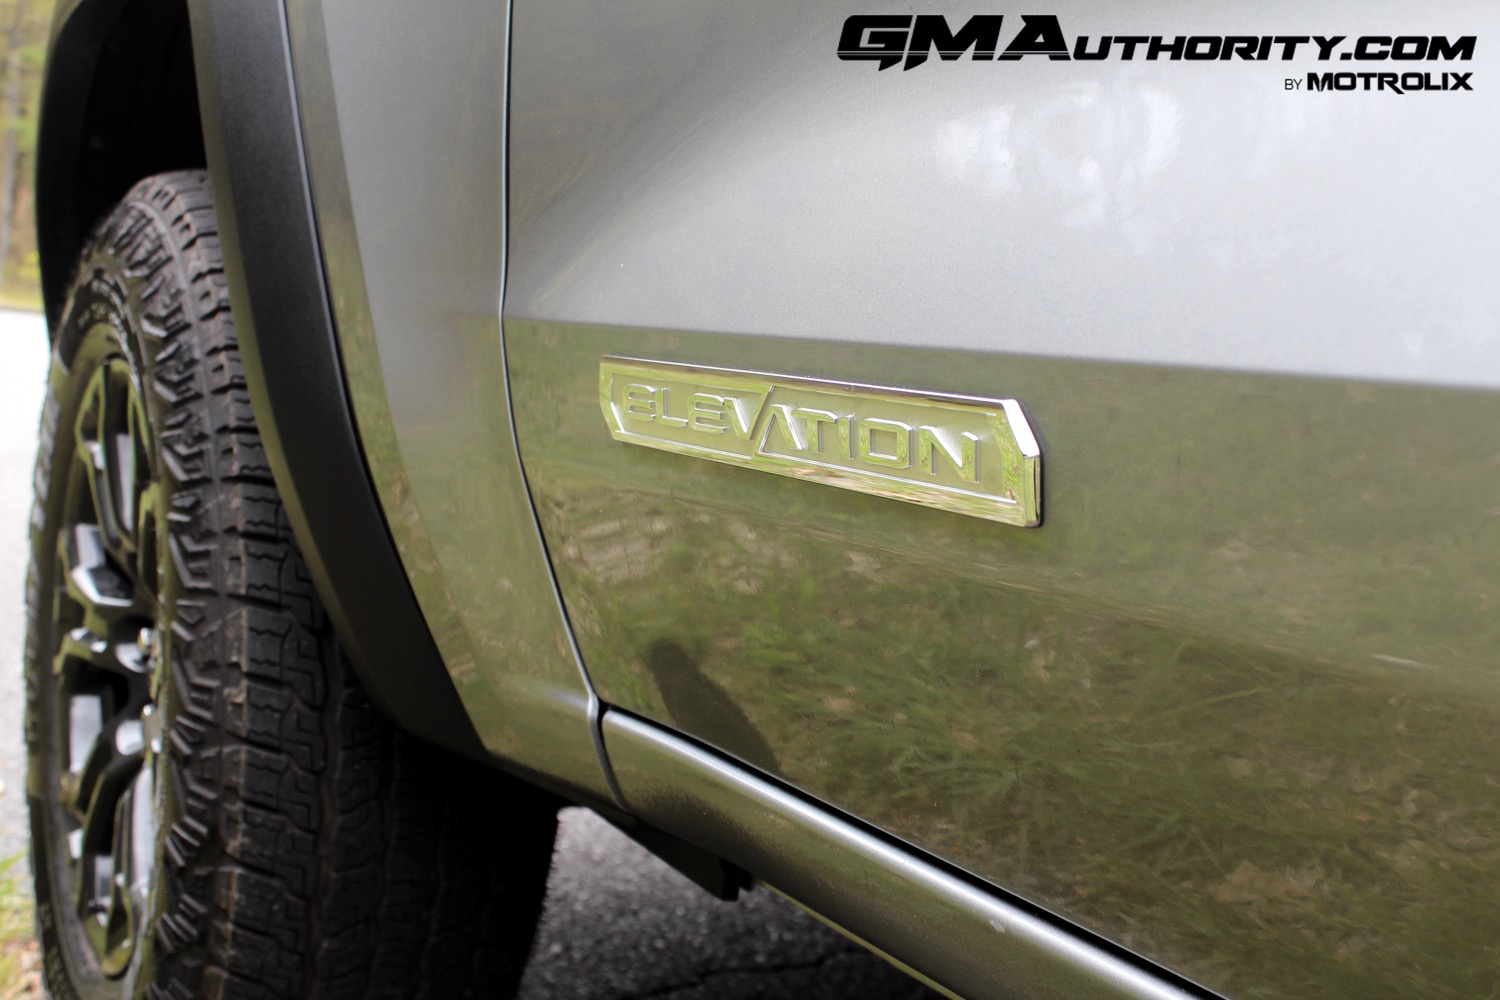 2023-gmc-canyon-elevation-sterling-metallic-gxd-first-drive-exterior-050-elevation-logo-badge-on-door